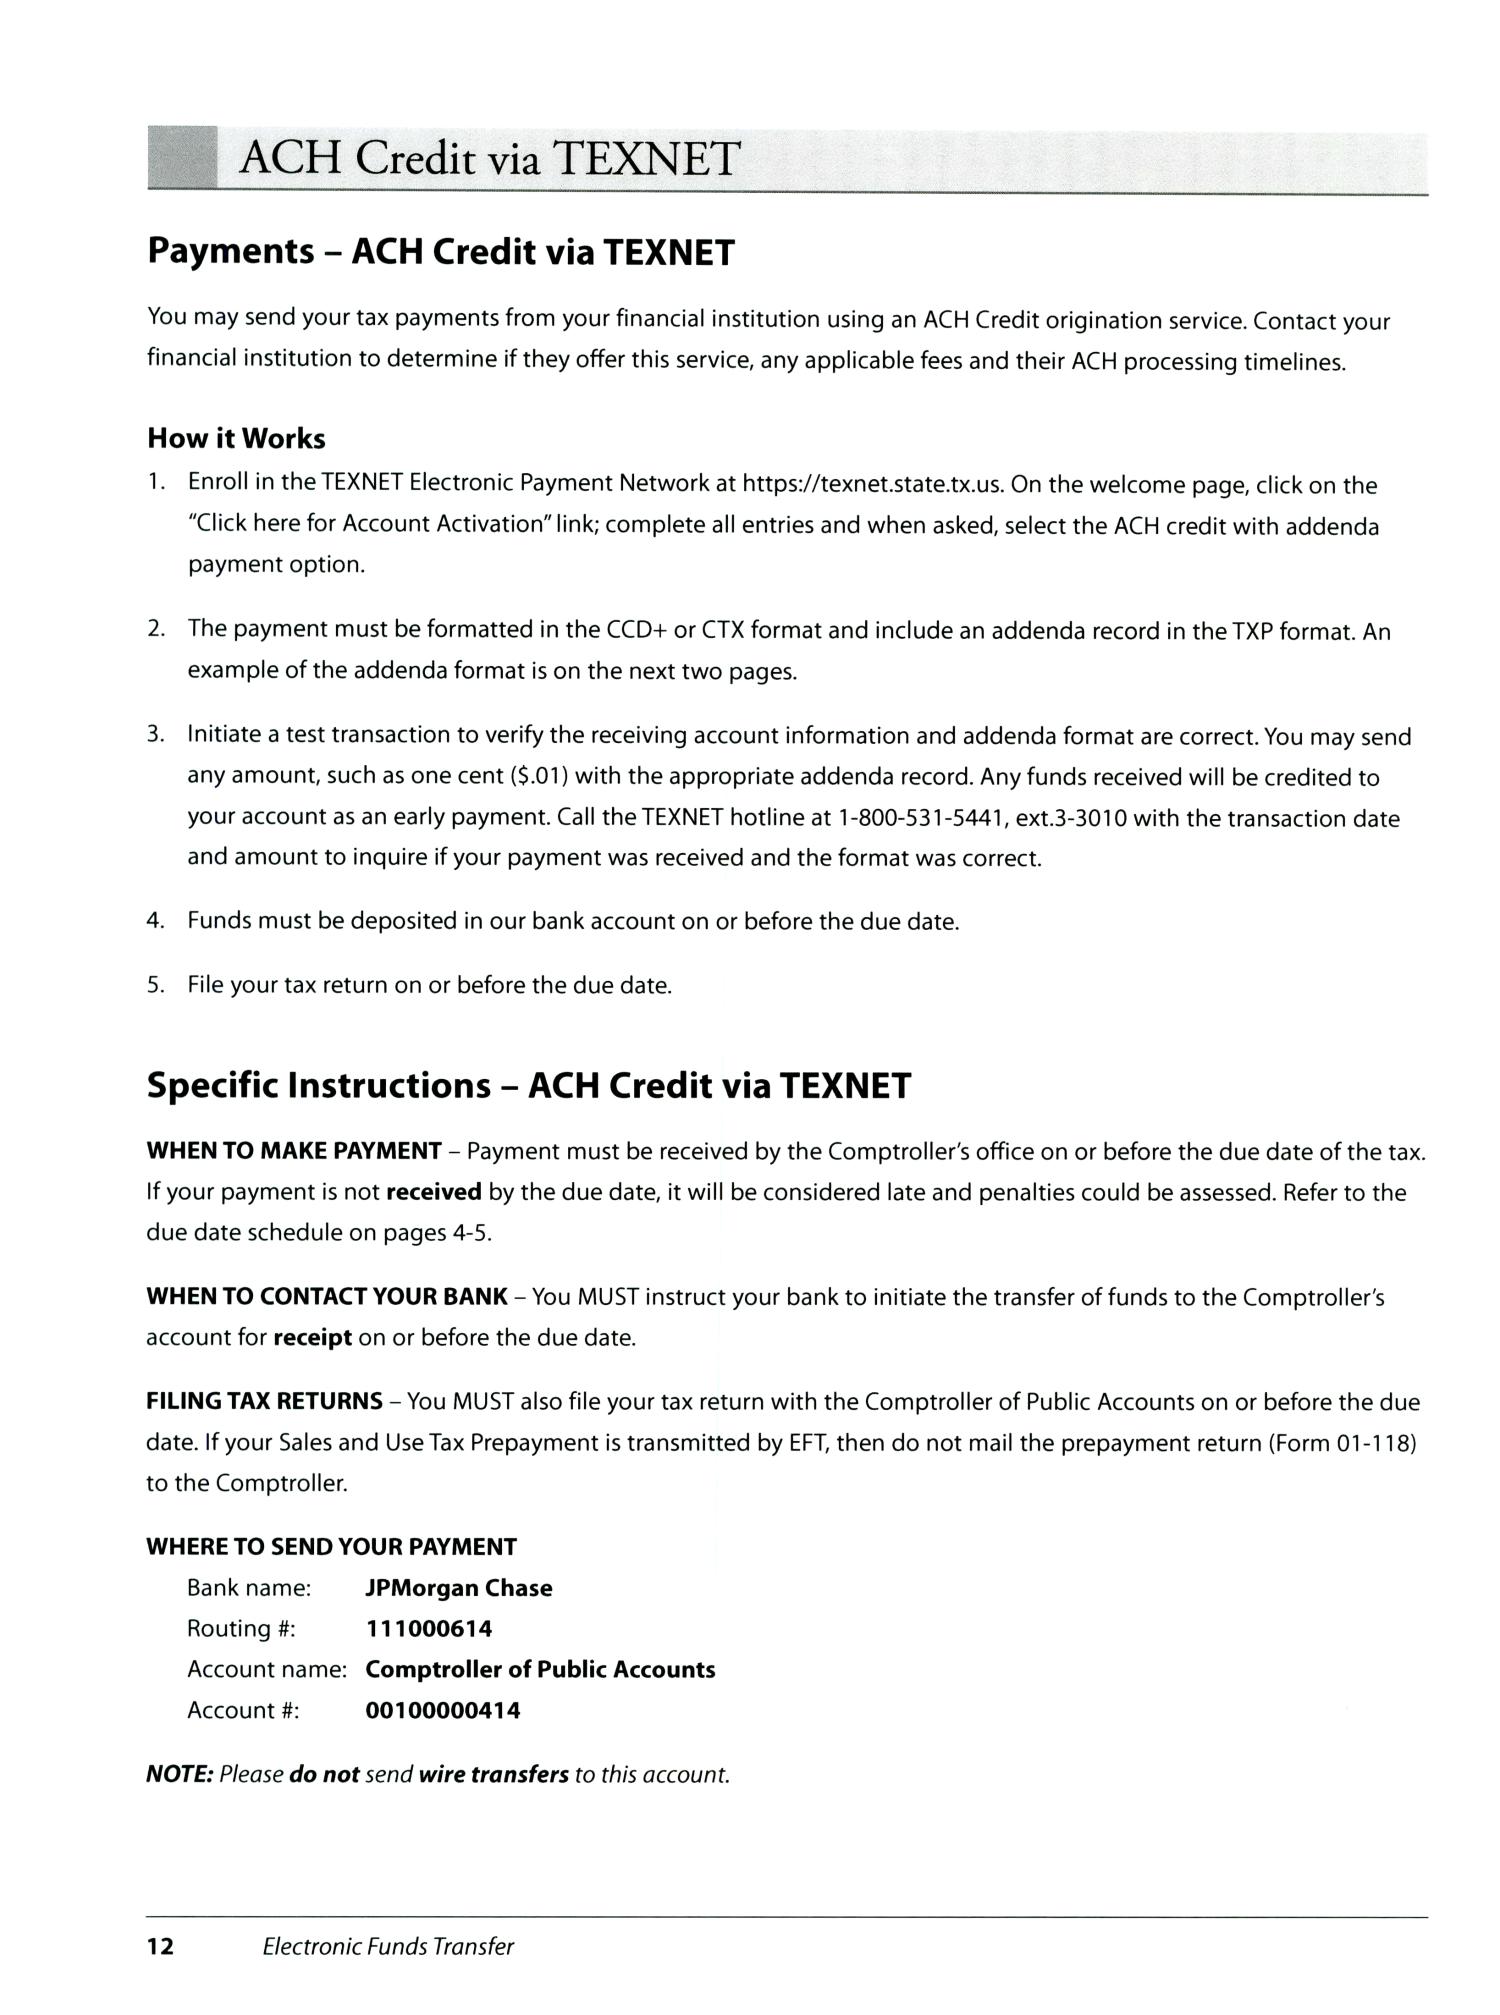 TEXNET Payment Instructions Booklet
                                                
                                                    12
                                                